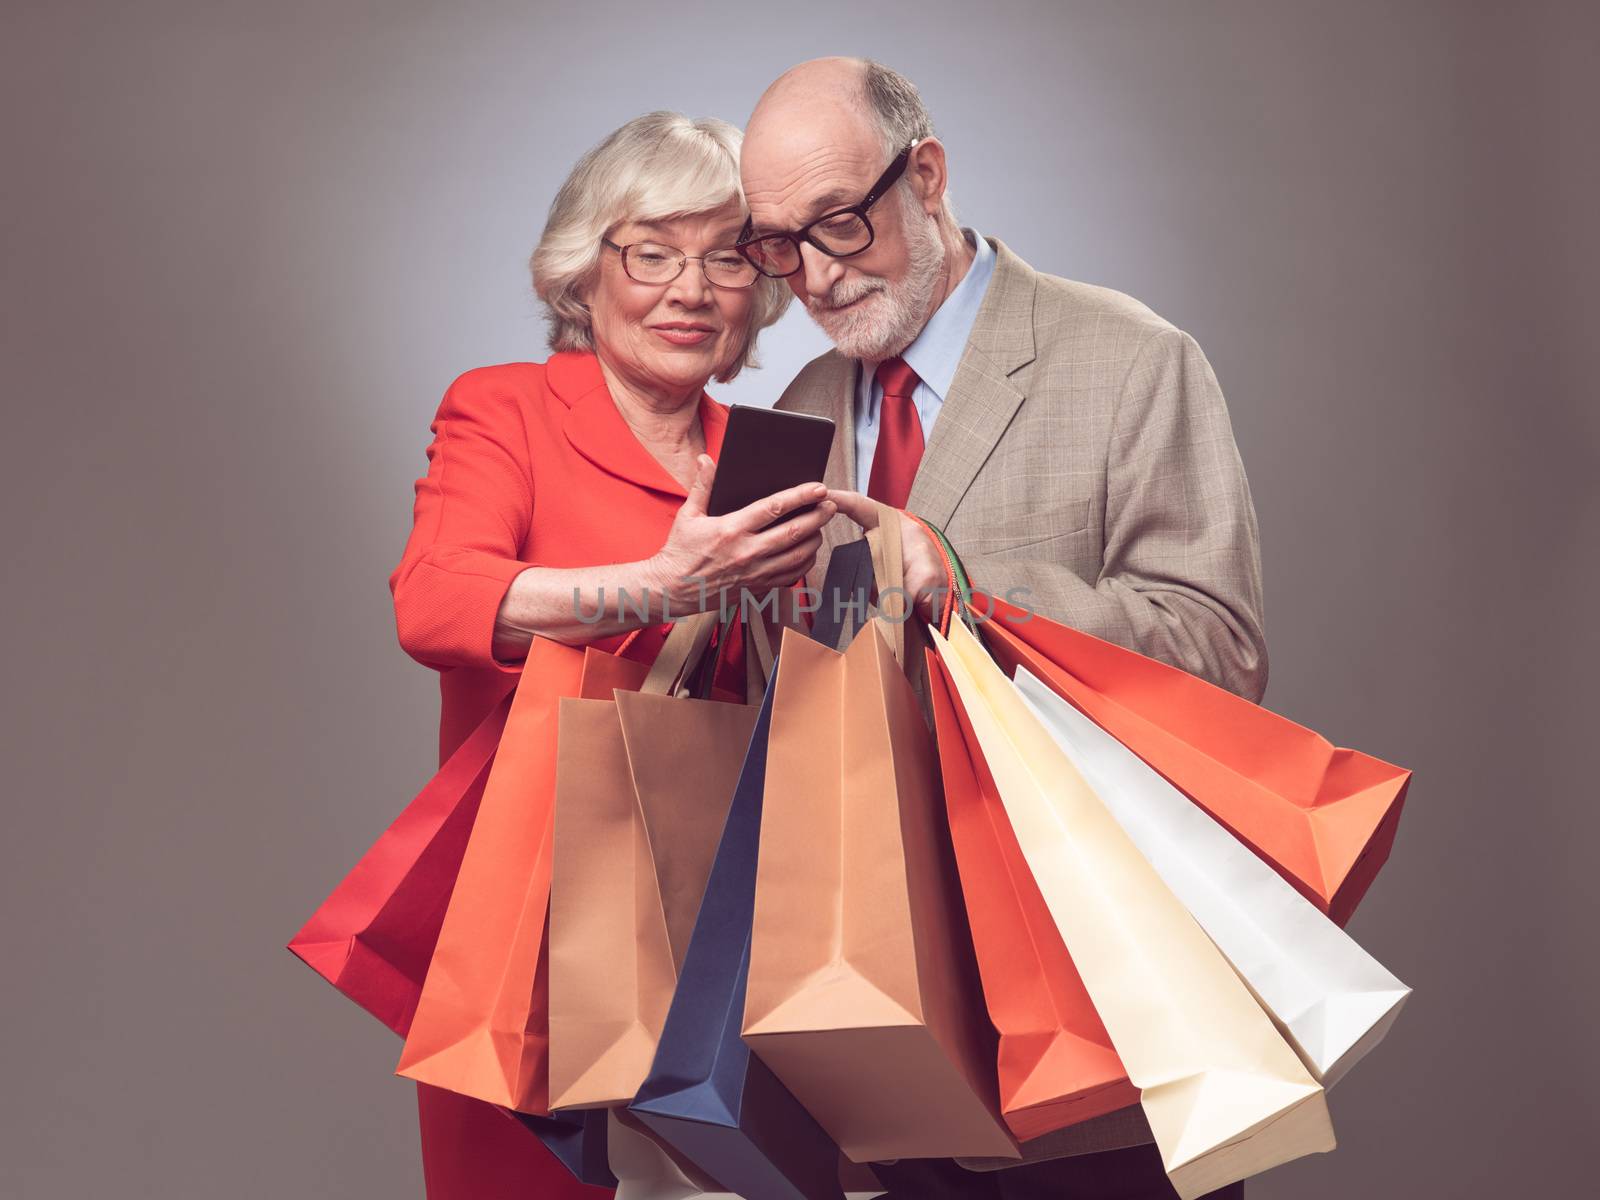 Happy elder couple with many shopping bags surfing the net online shopping concept